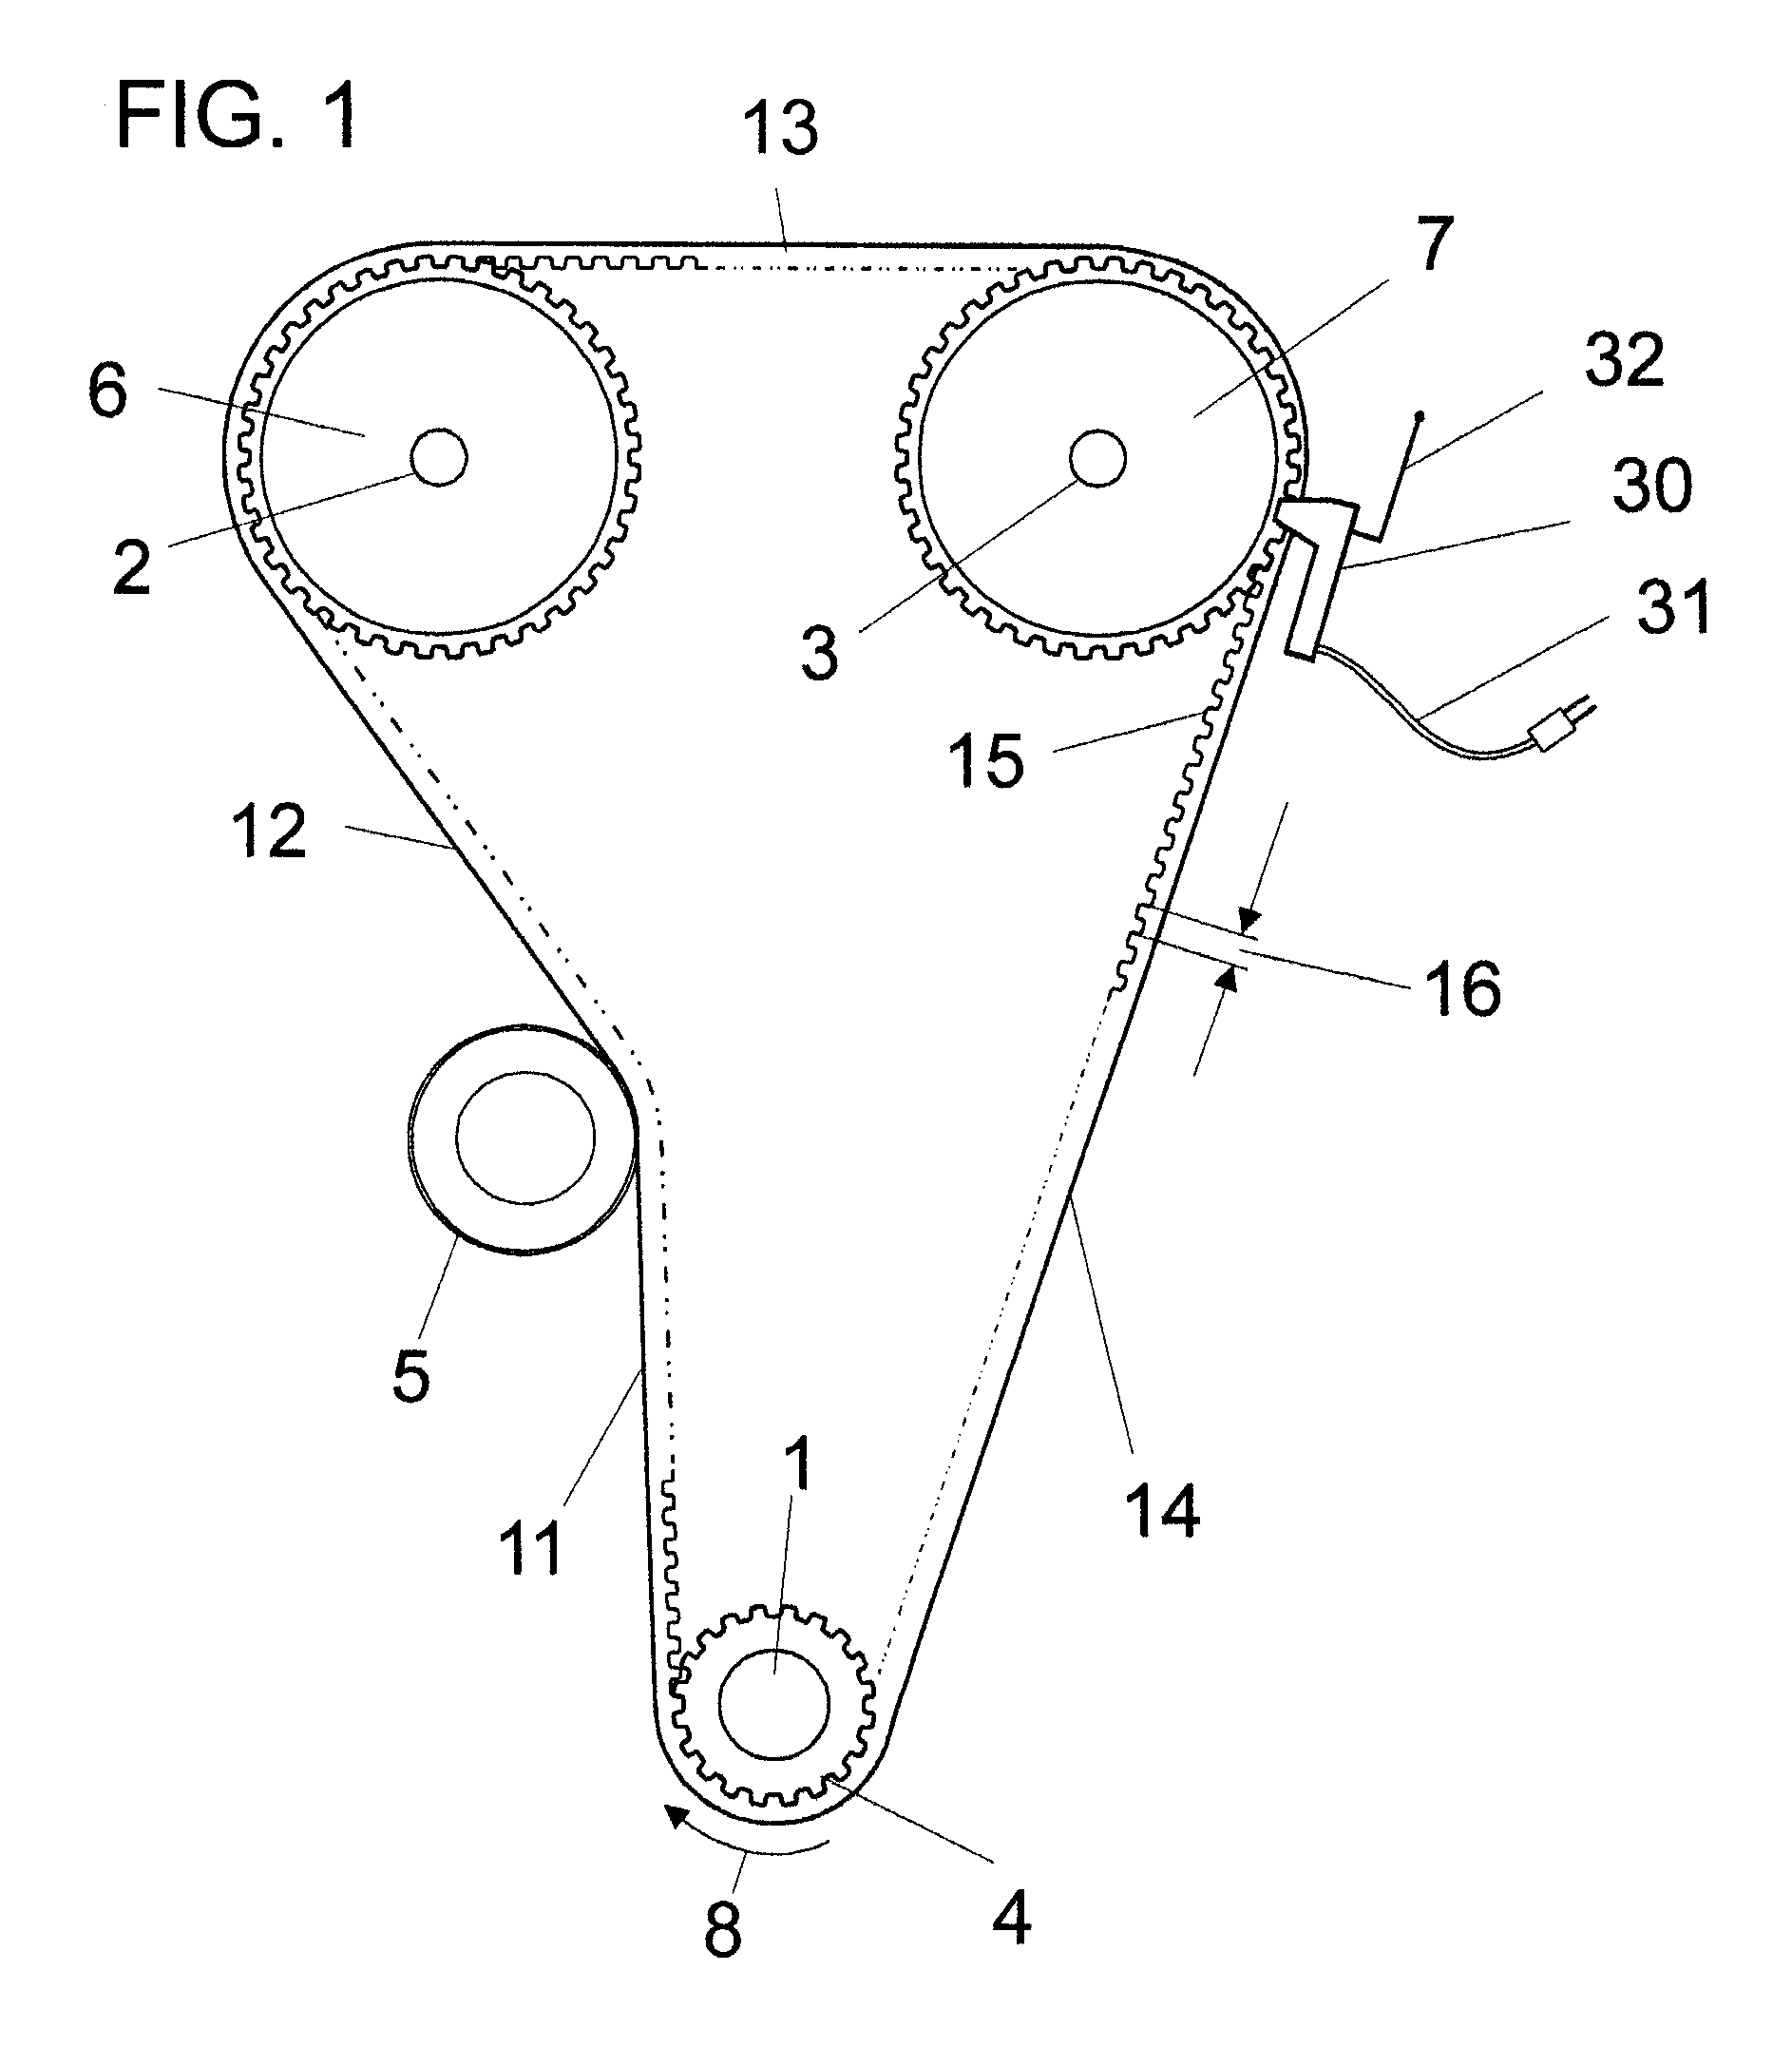 Apparatus And Method For Detecting Transmission Belt Wear And Monitoring Belt Drive System Performance